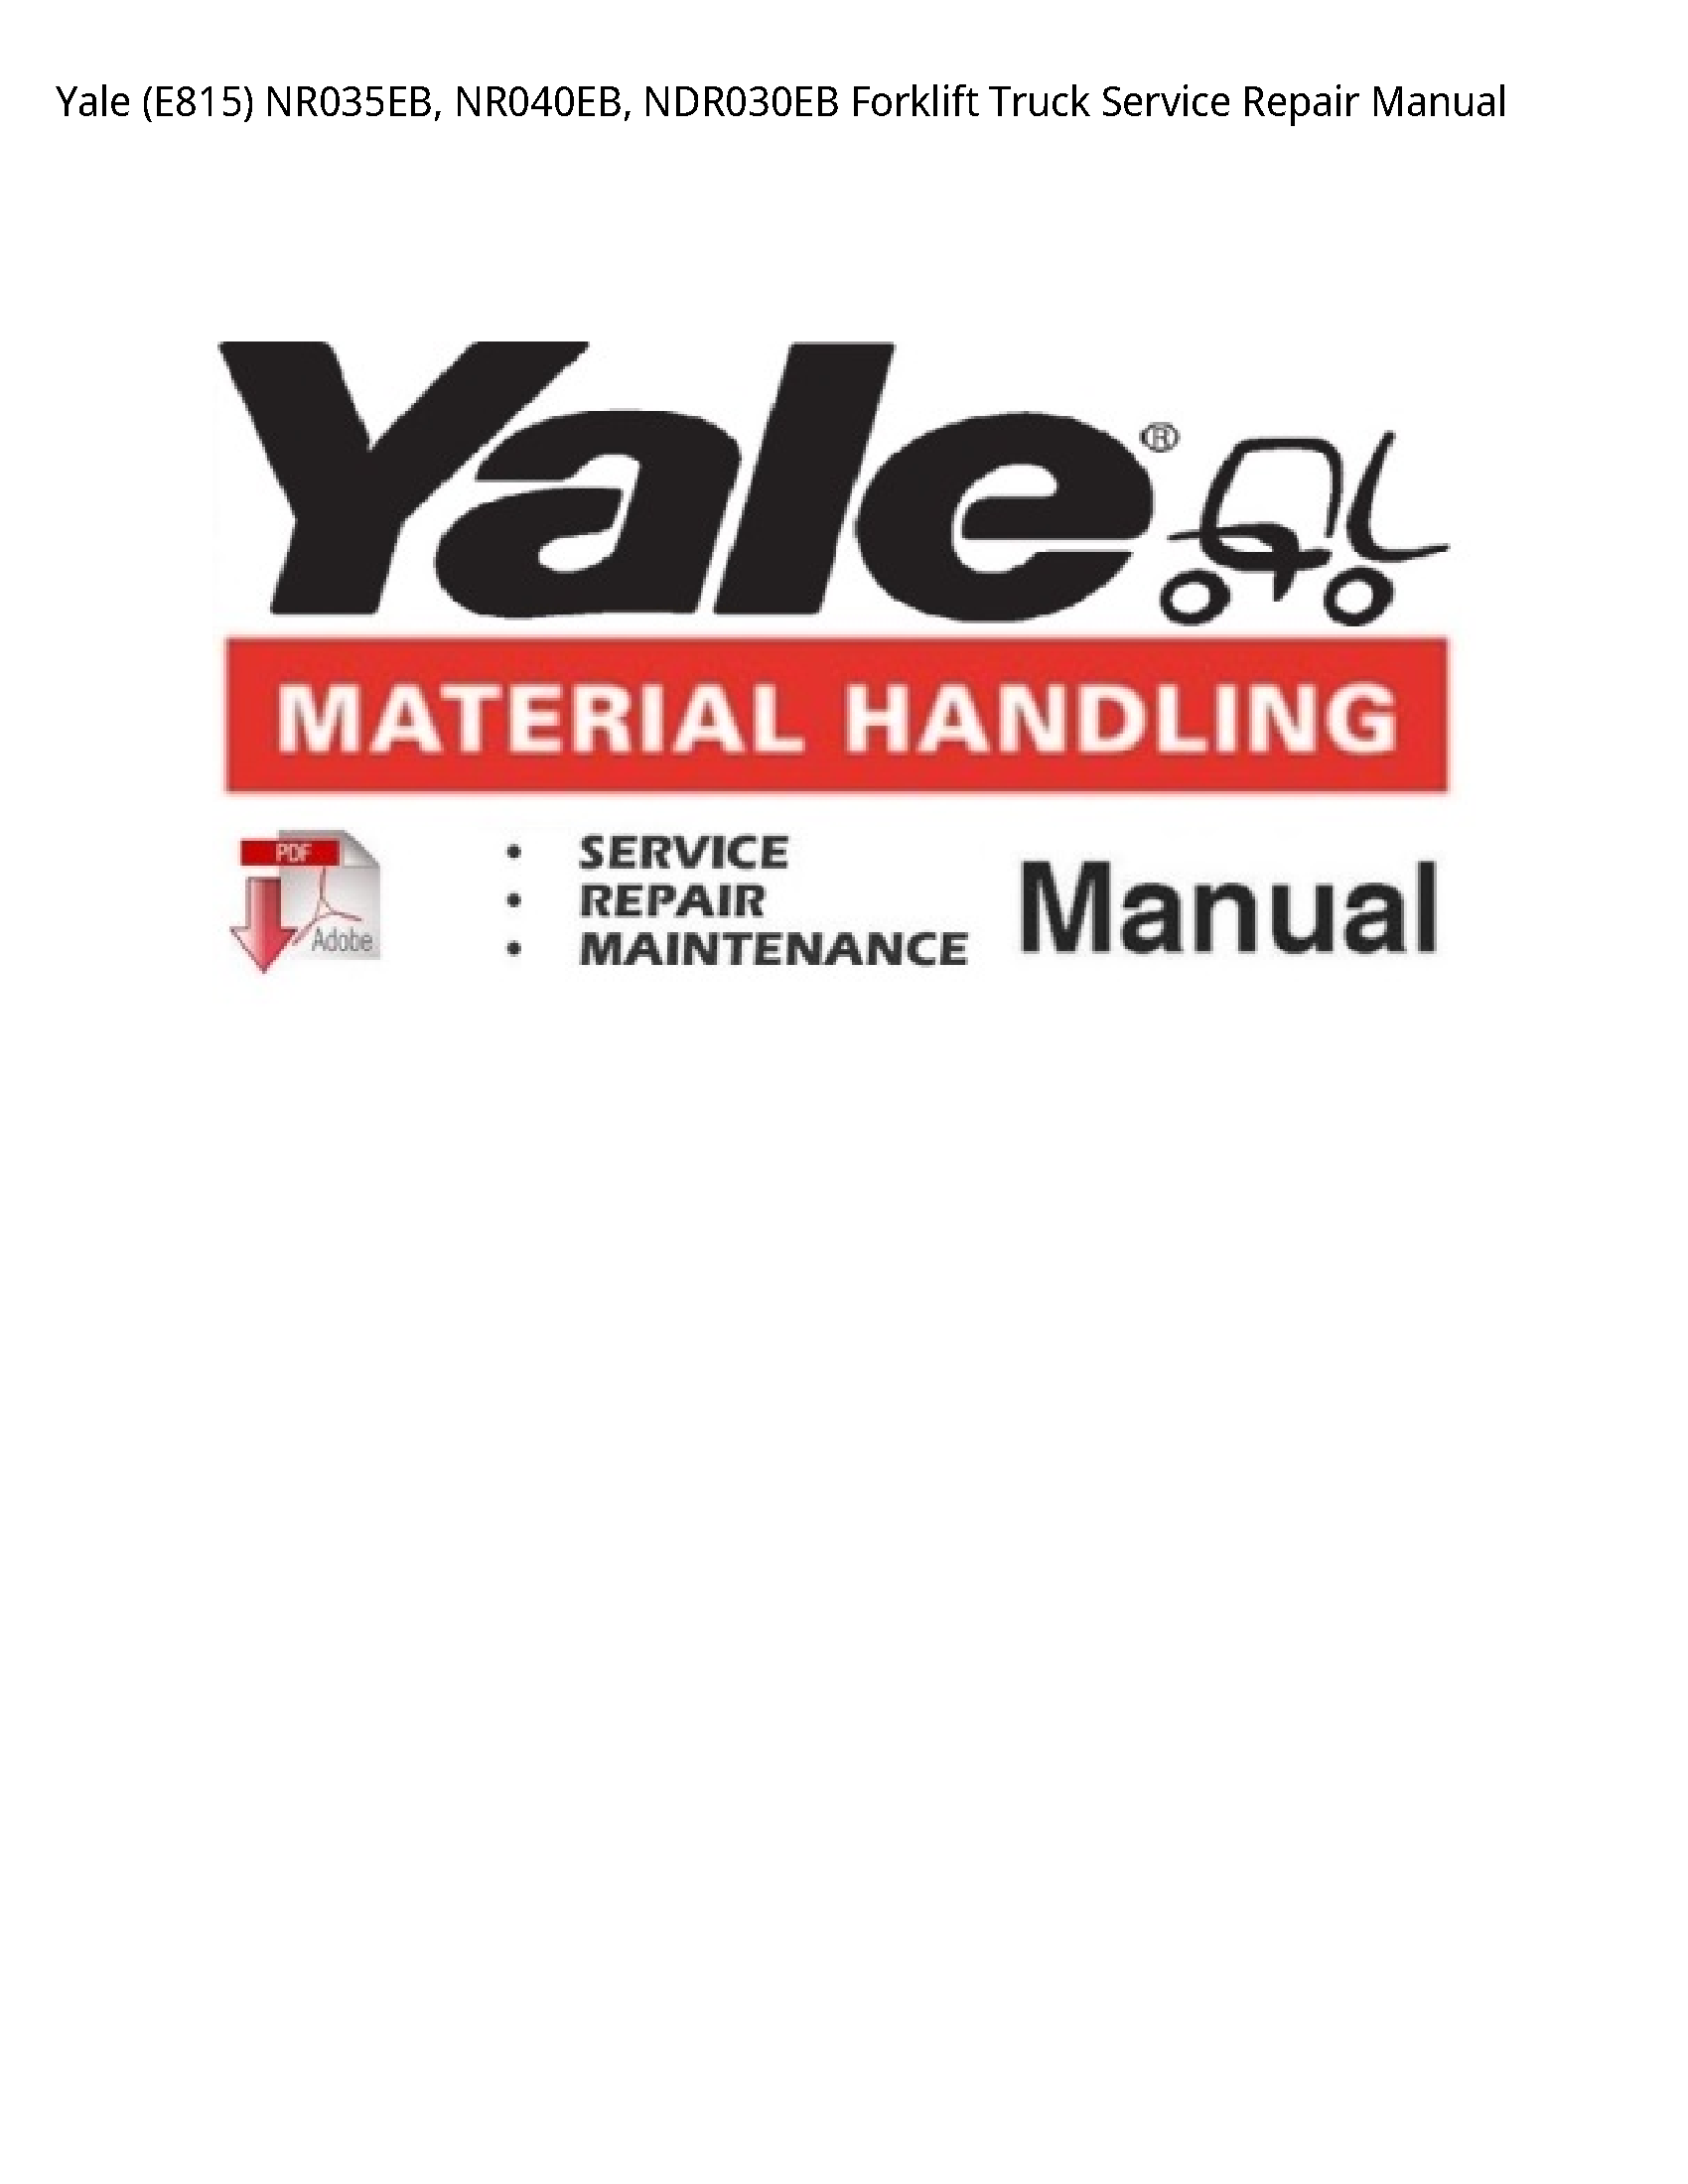 Yale (E815) Forklift Truck manual